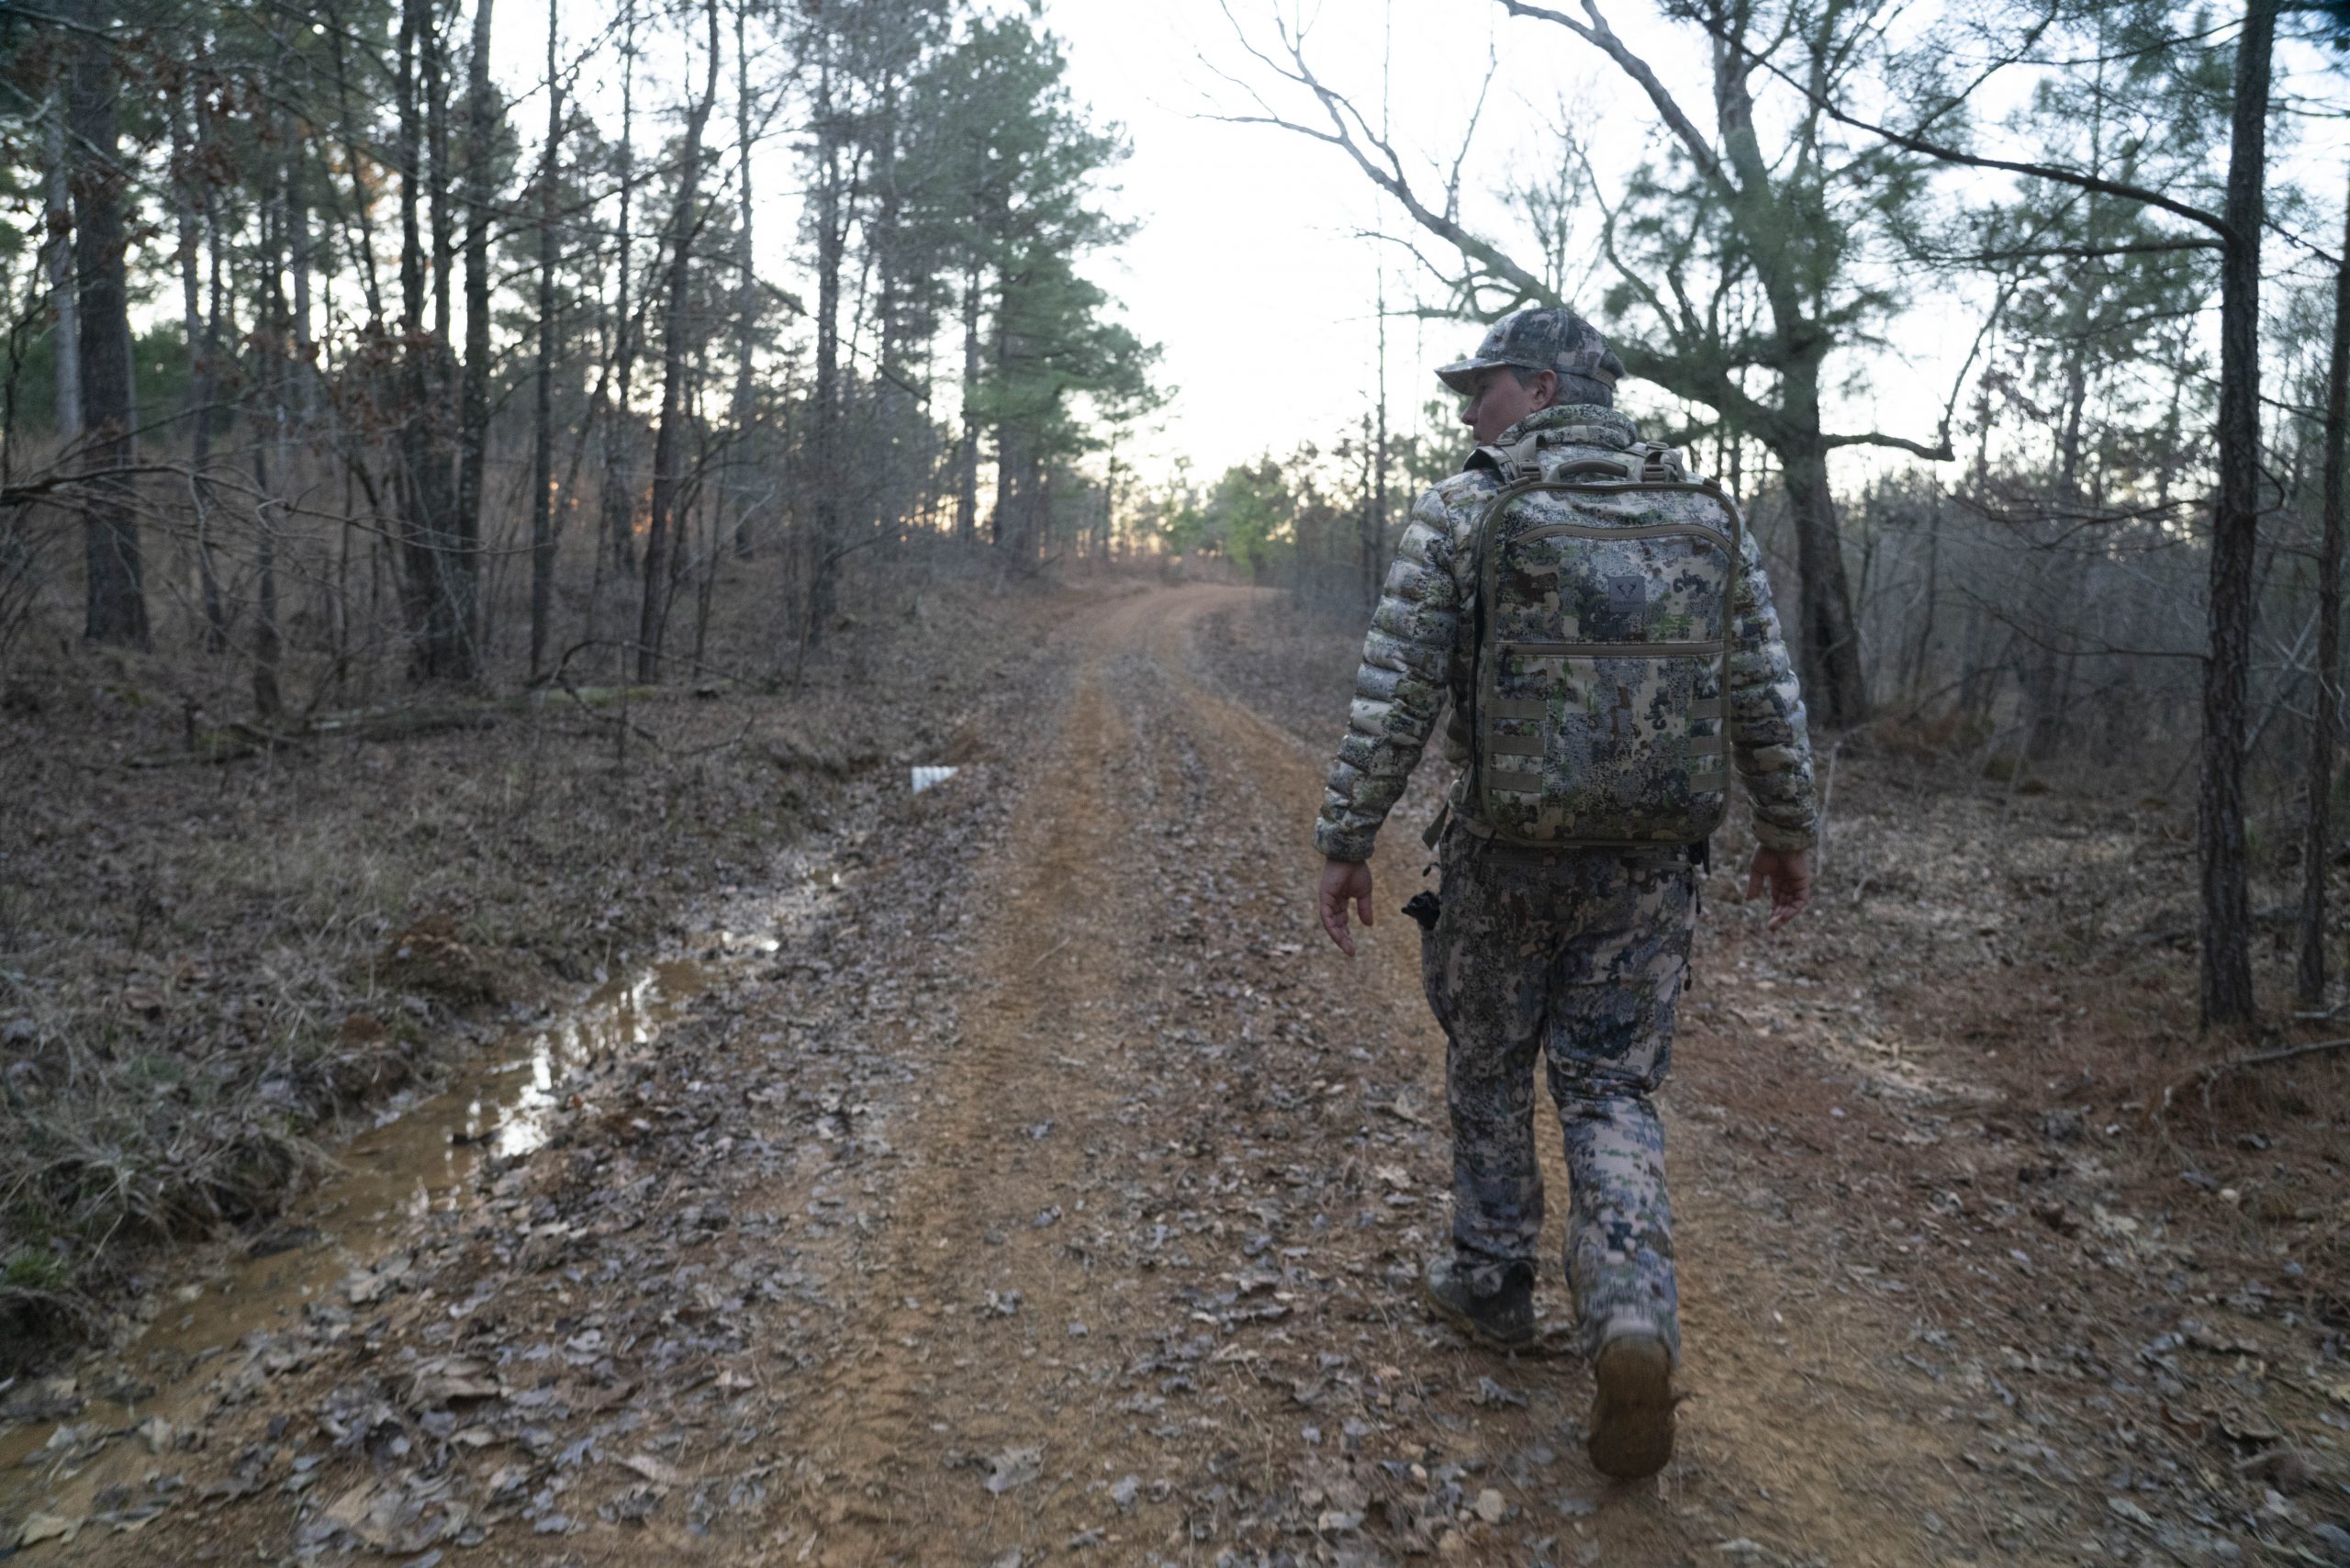 FORLOH Introduces the One Pack Fully Waterproof Hunting Backpack